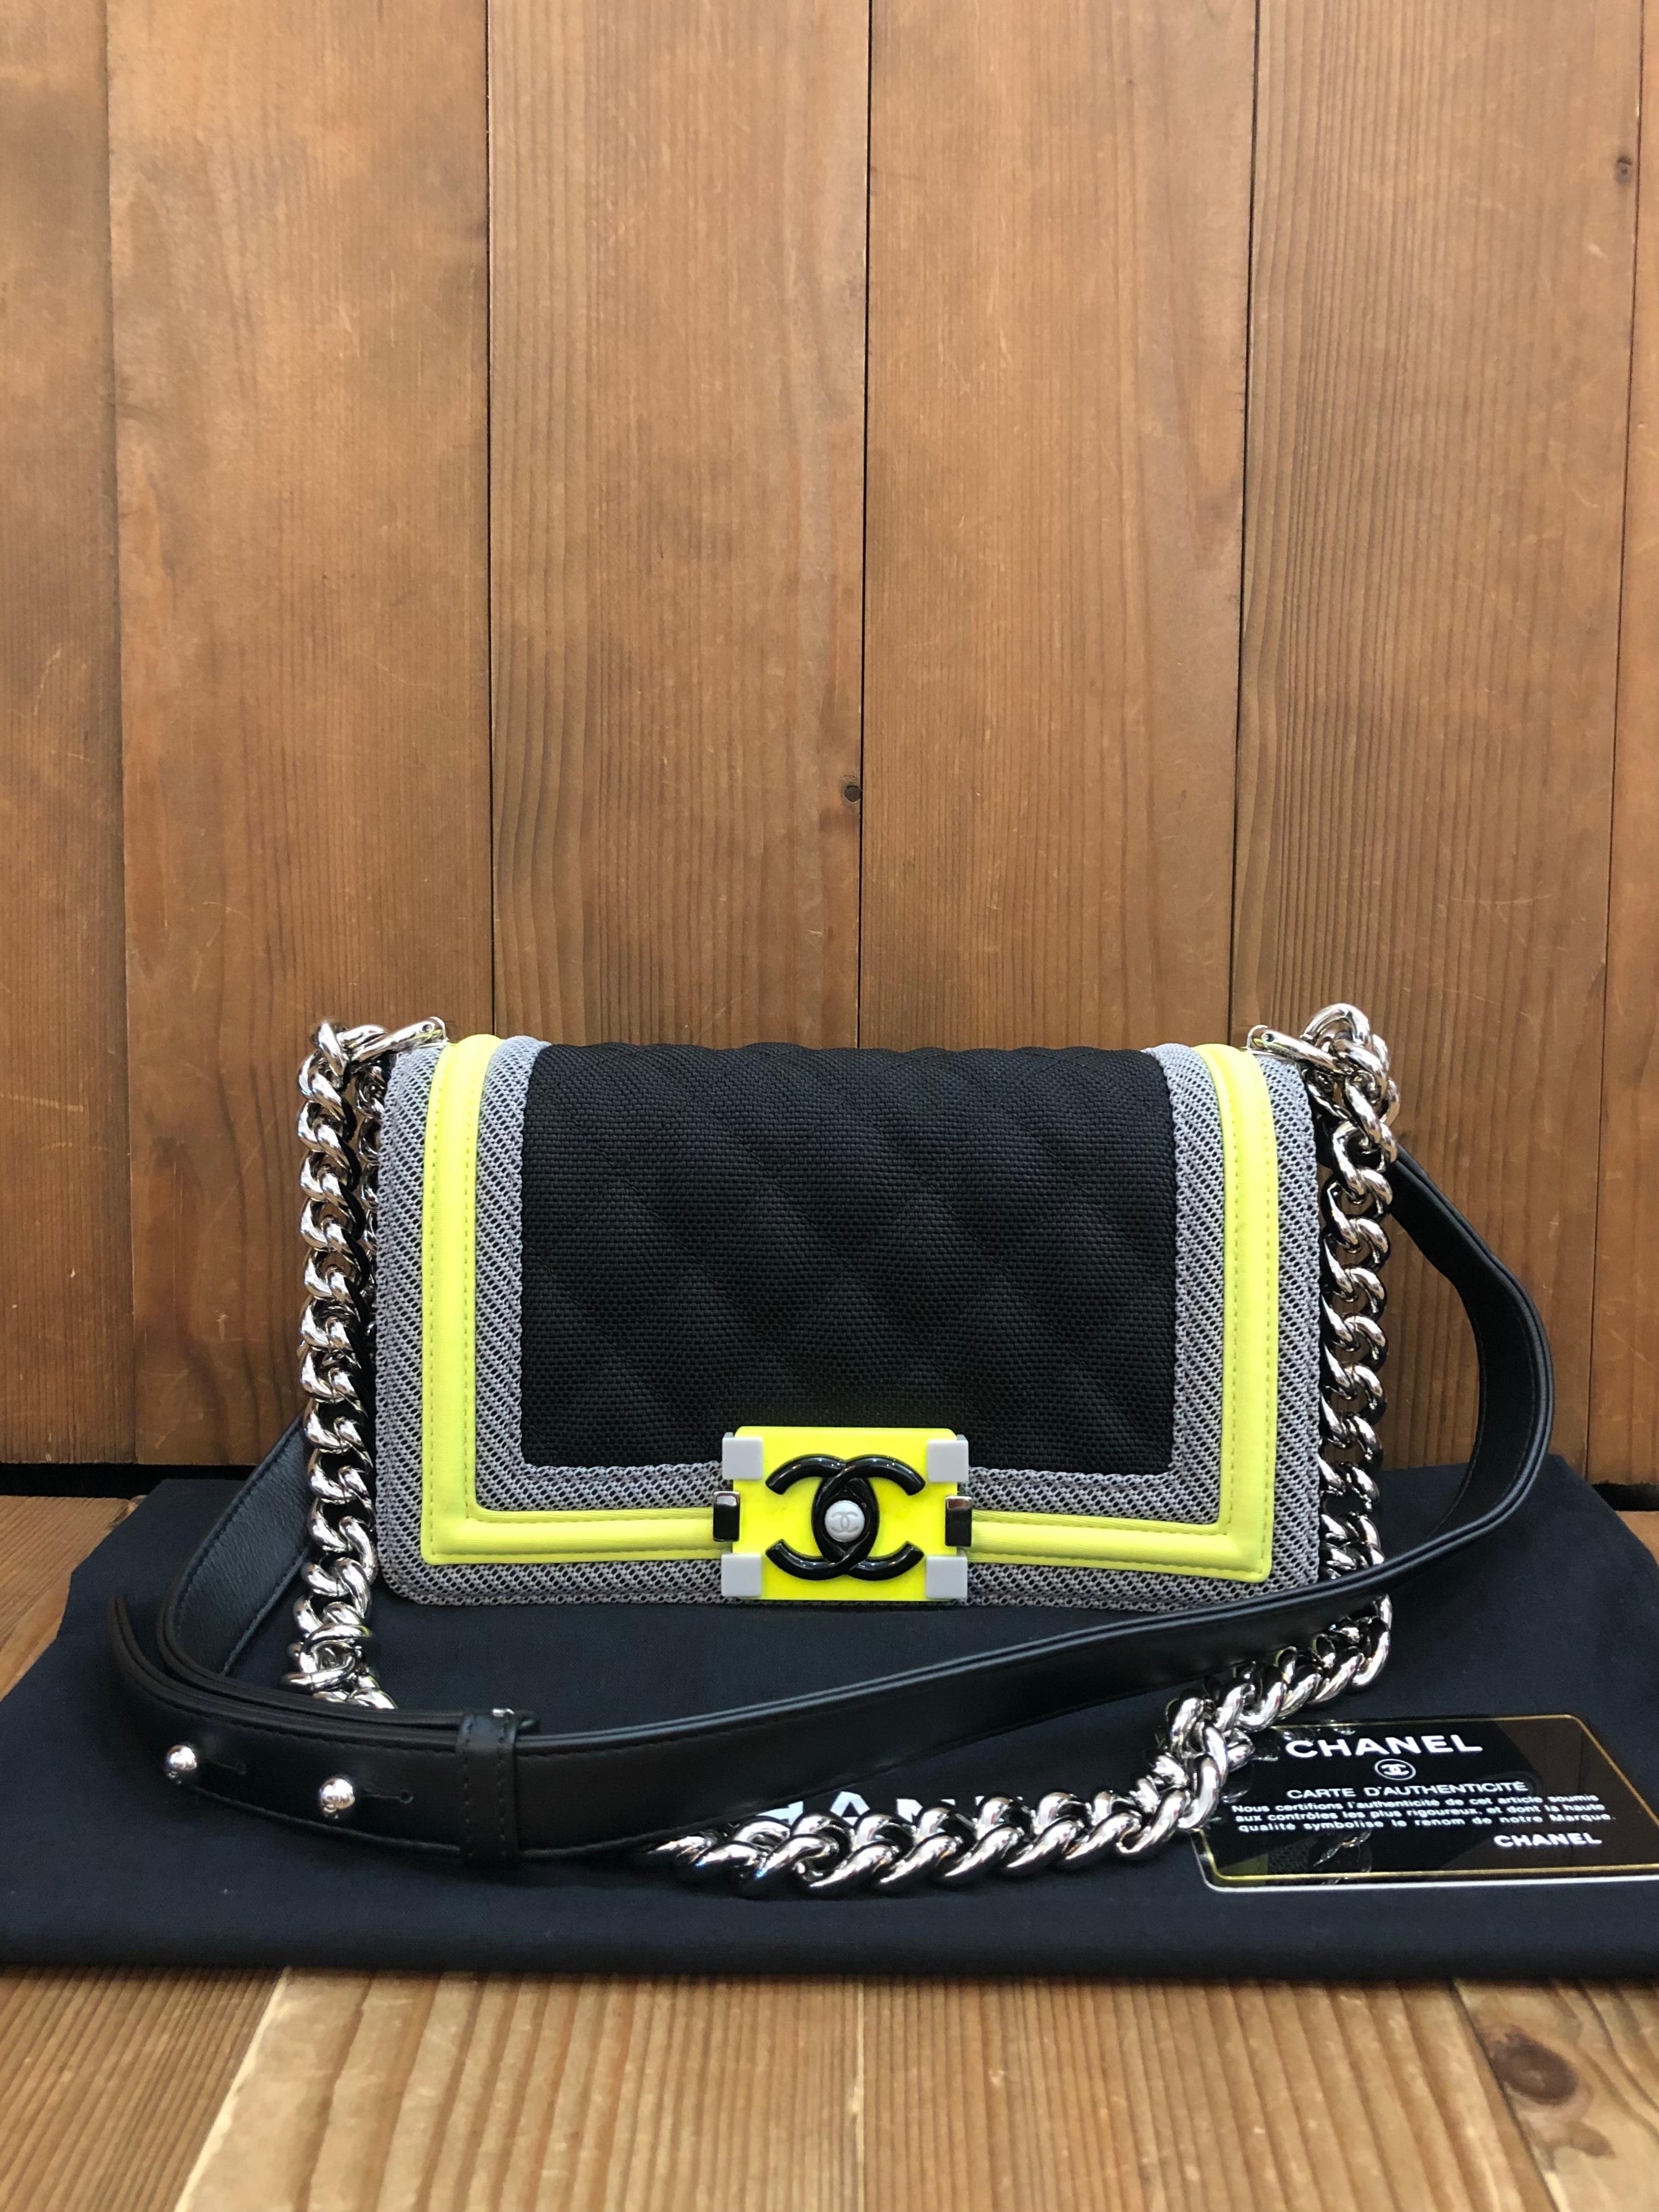 This CHANEL Small Boy bag is crafted of black diamond quilted nylon decorated with green/yellow neon trims. Front flap resin Boy push-lock closure opens to a black textile interior featuring a patch pocket. This Boy features a sturdy silver-toned